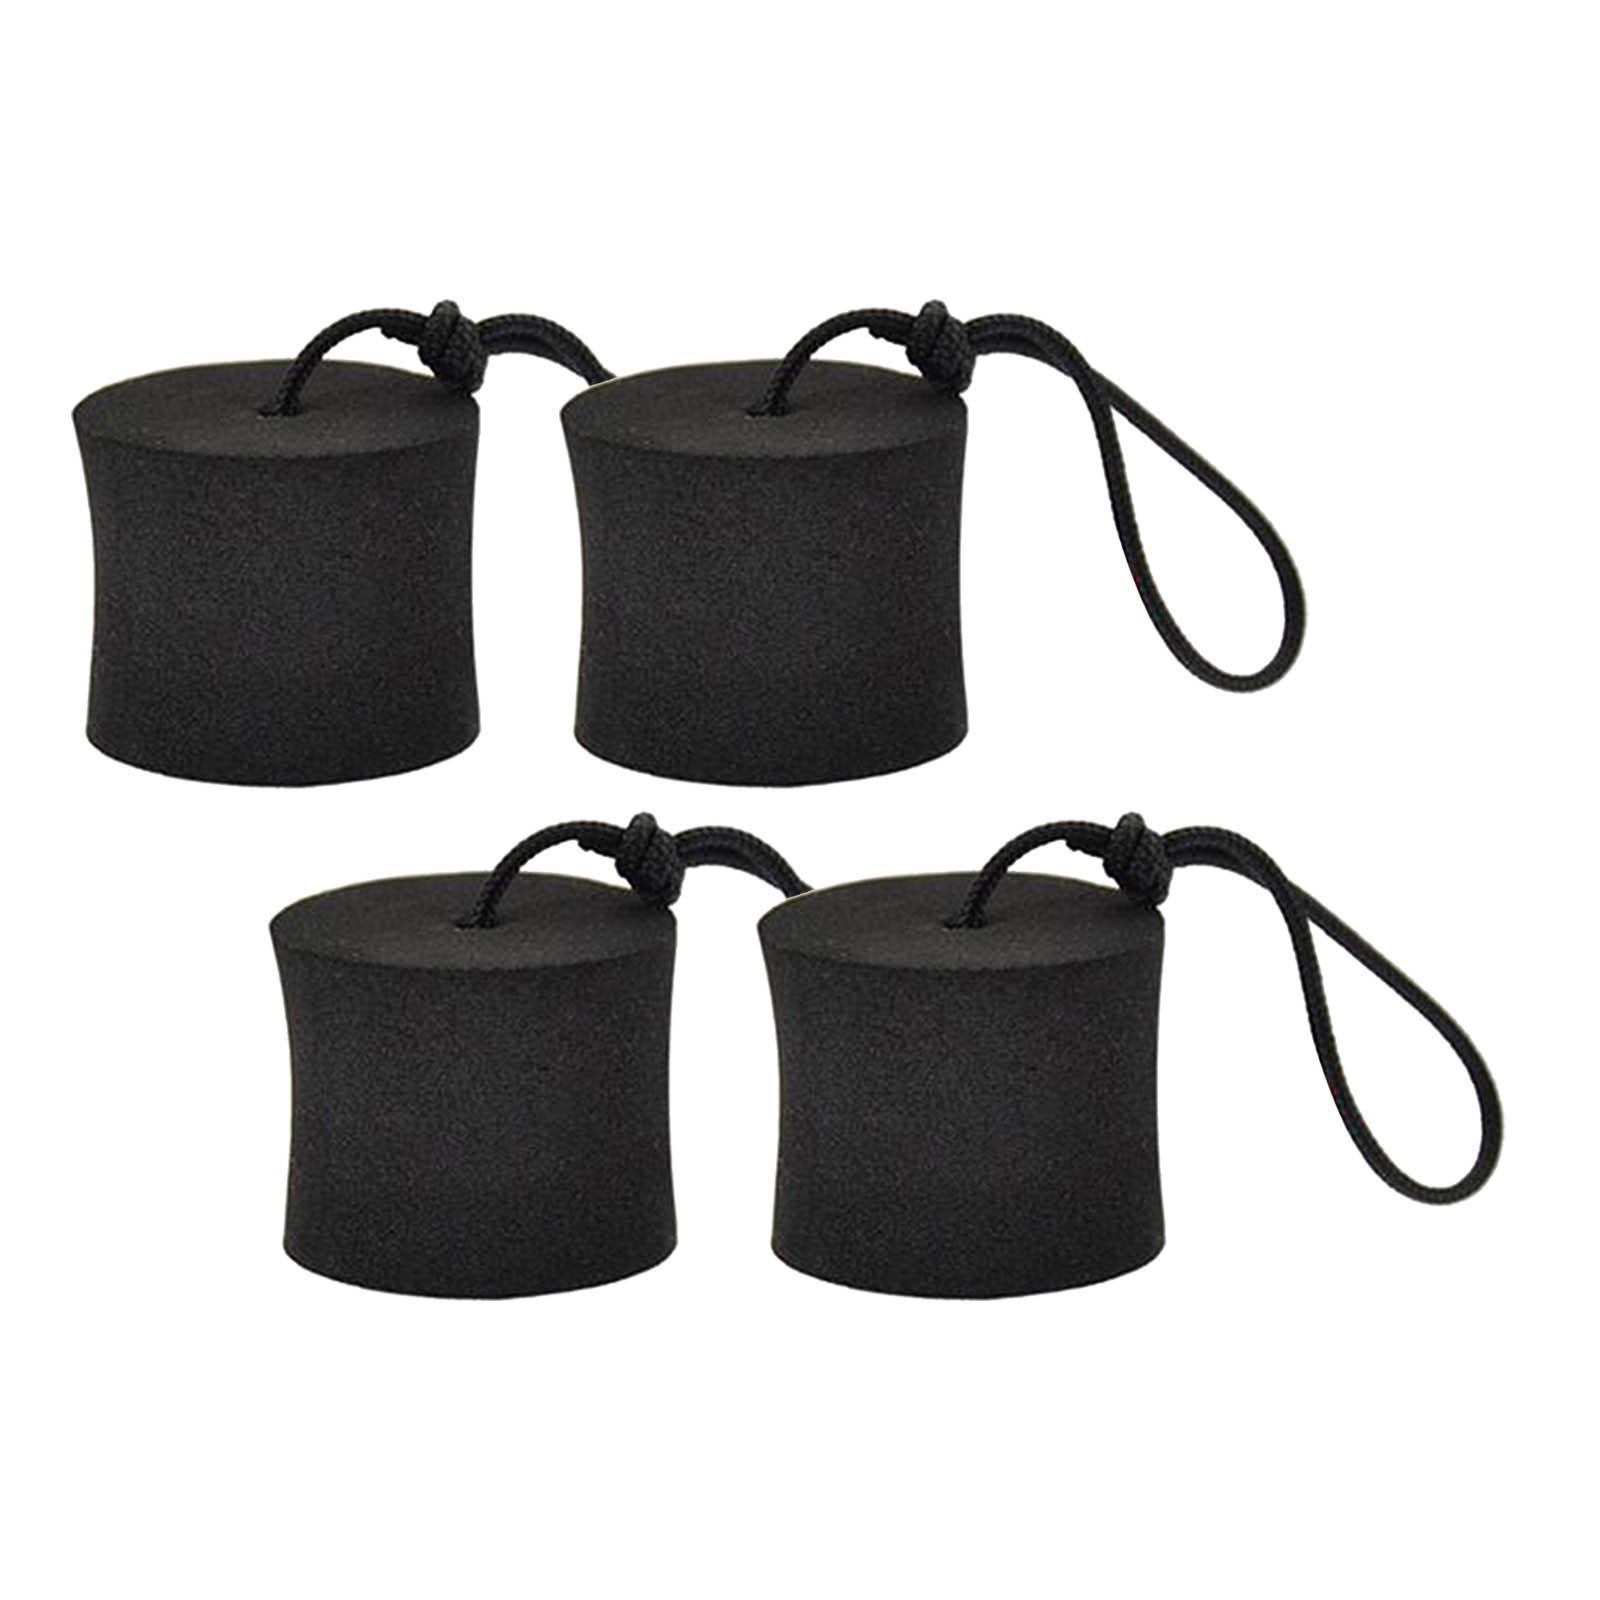 4Pcs Kayak Scupper Plug with Lanyard Multipurpose Durable Replacement Part Canoe Drain Holes Stopper Bung for Inflatable Boat Old Town Kayak